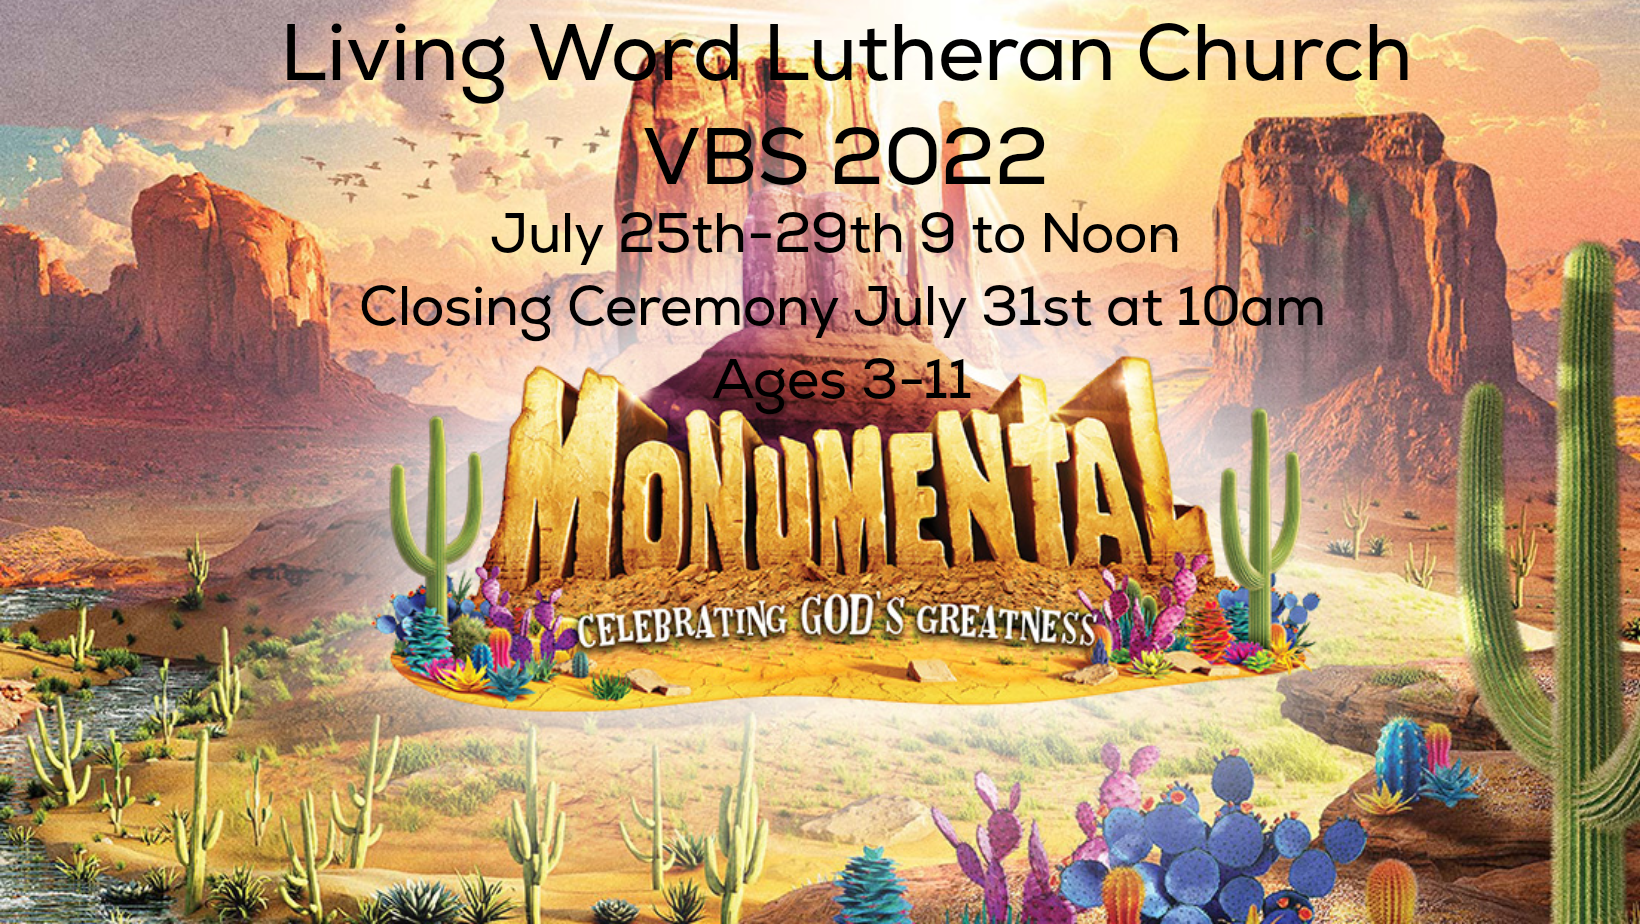 VBS Registration Required